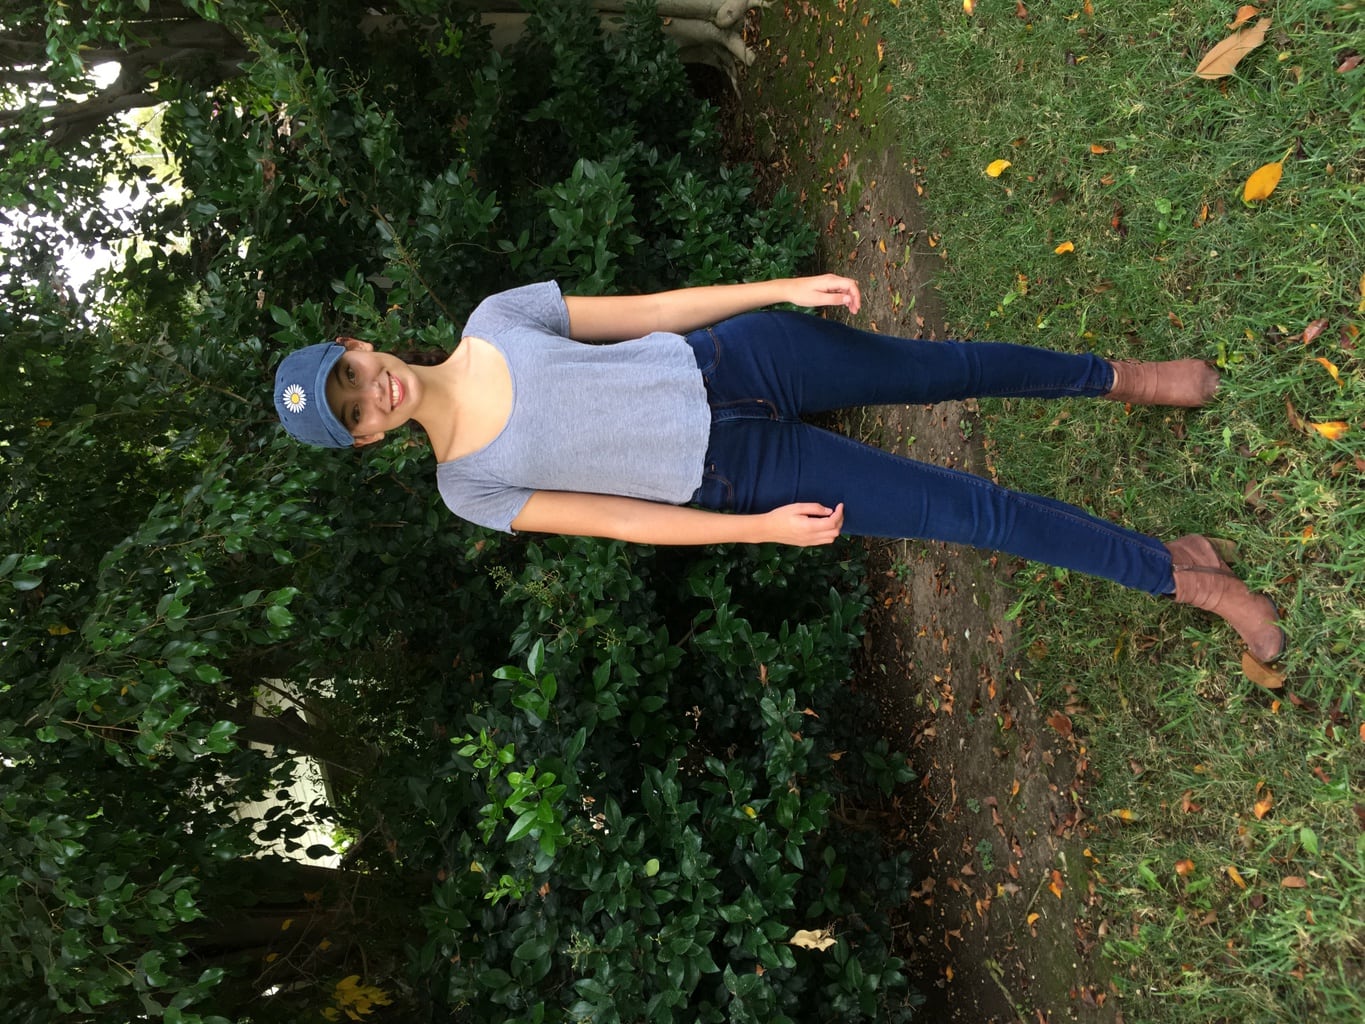 Girl in baseball cap, grey shirt, jeans, and brown boots